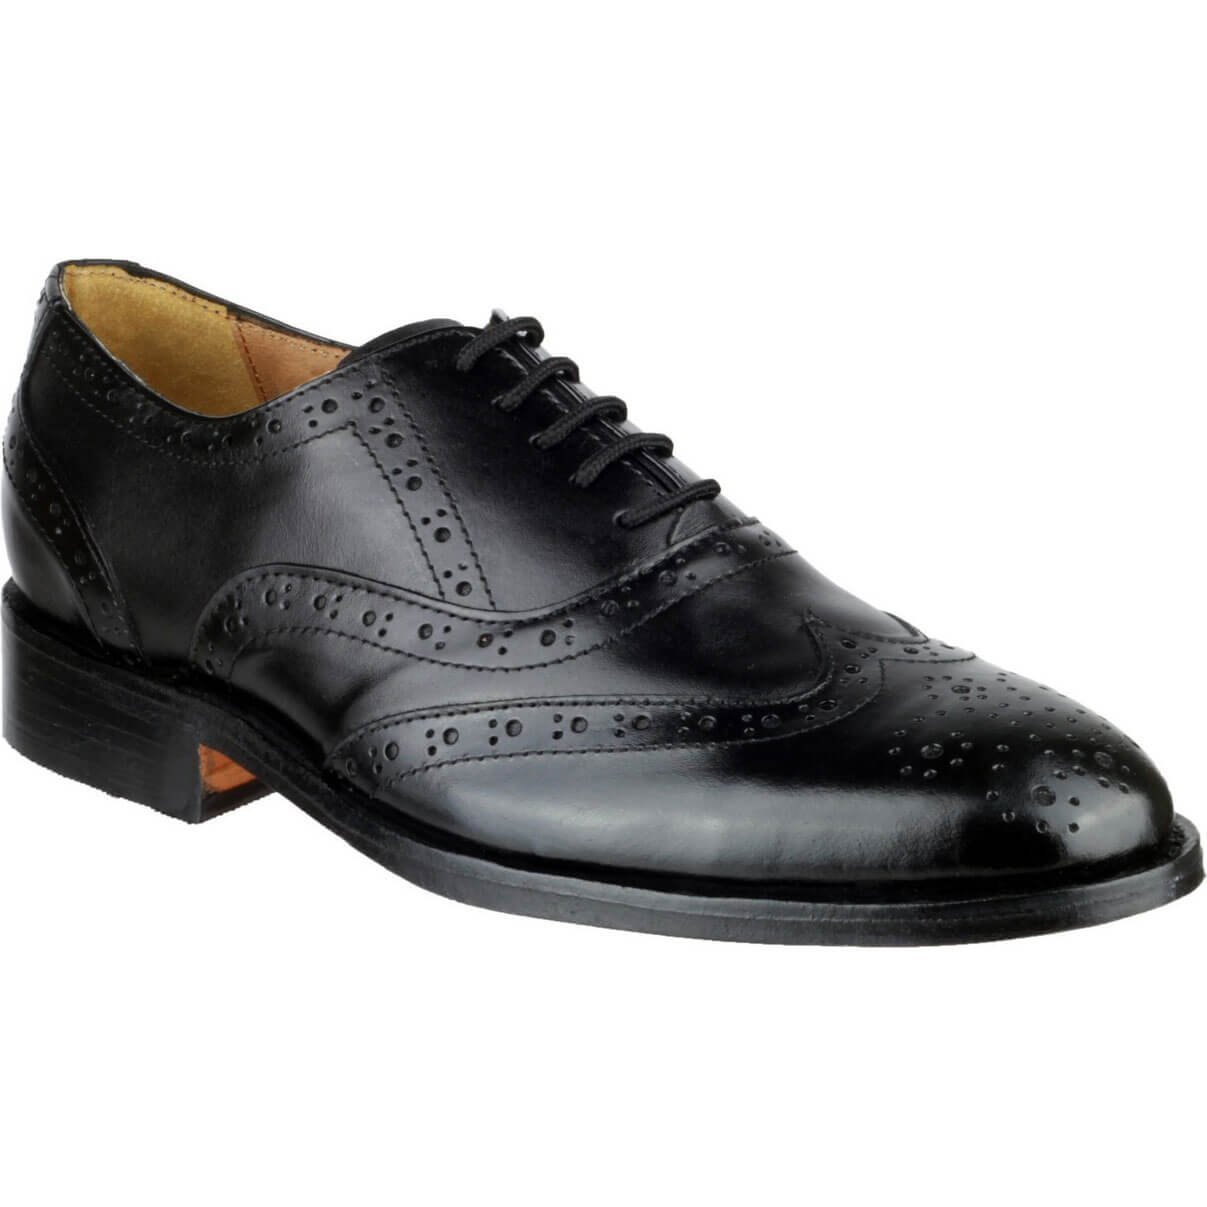 Image of Amblers Ben Leather Soled Oxford Brogue Black Size 10